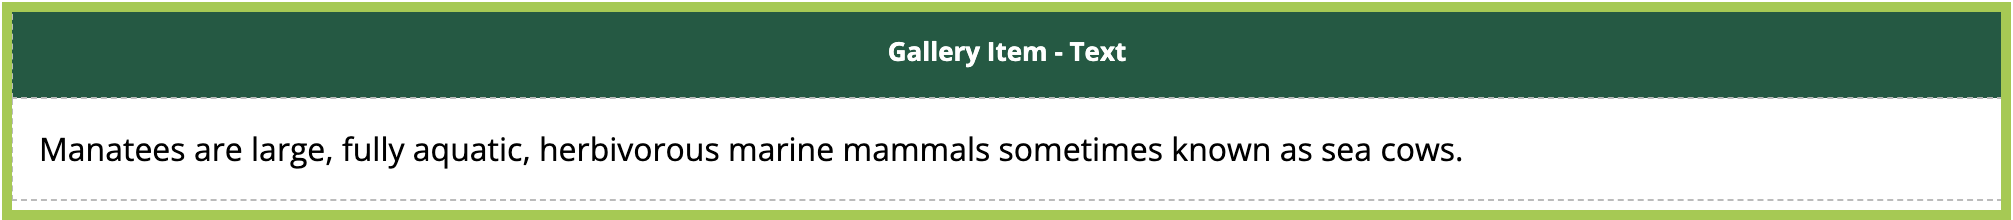 Editing view of Gallery Item - Text Snippet.